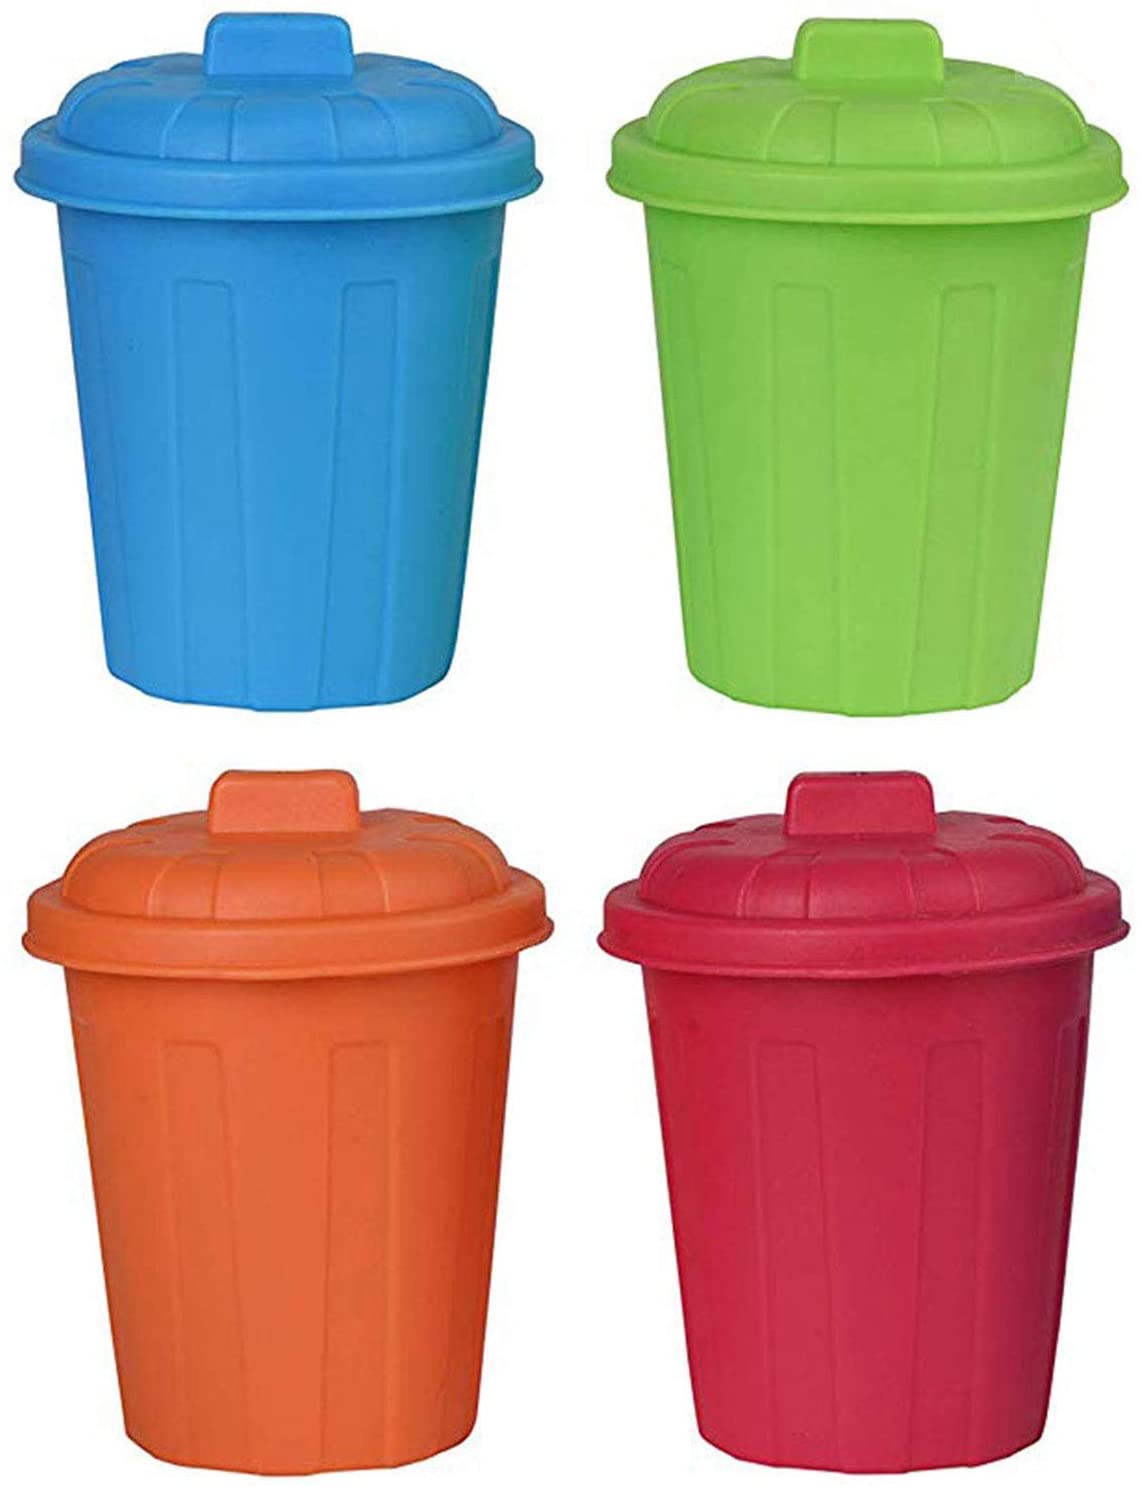 Up To 24% Off on 4 Pack Small Trash Can Mini C